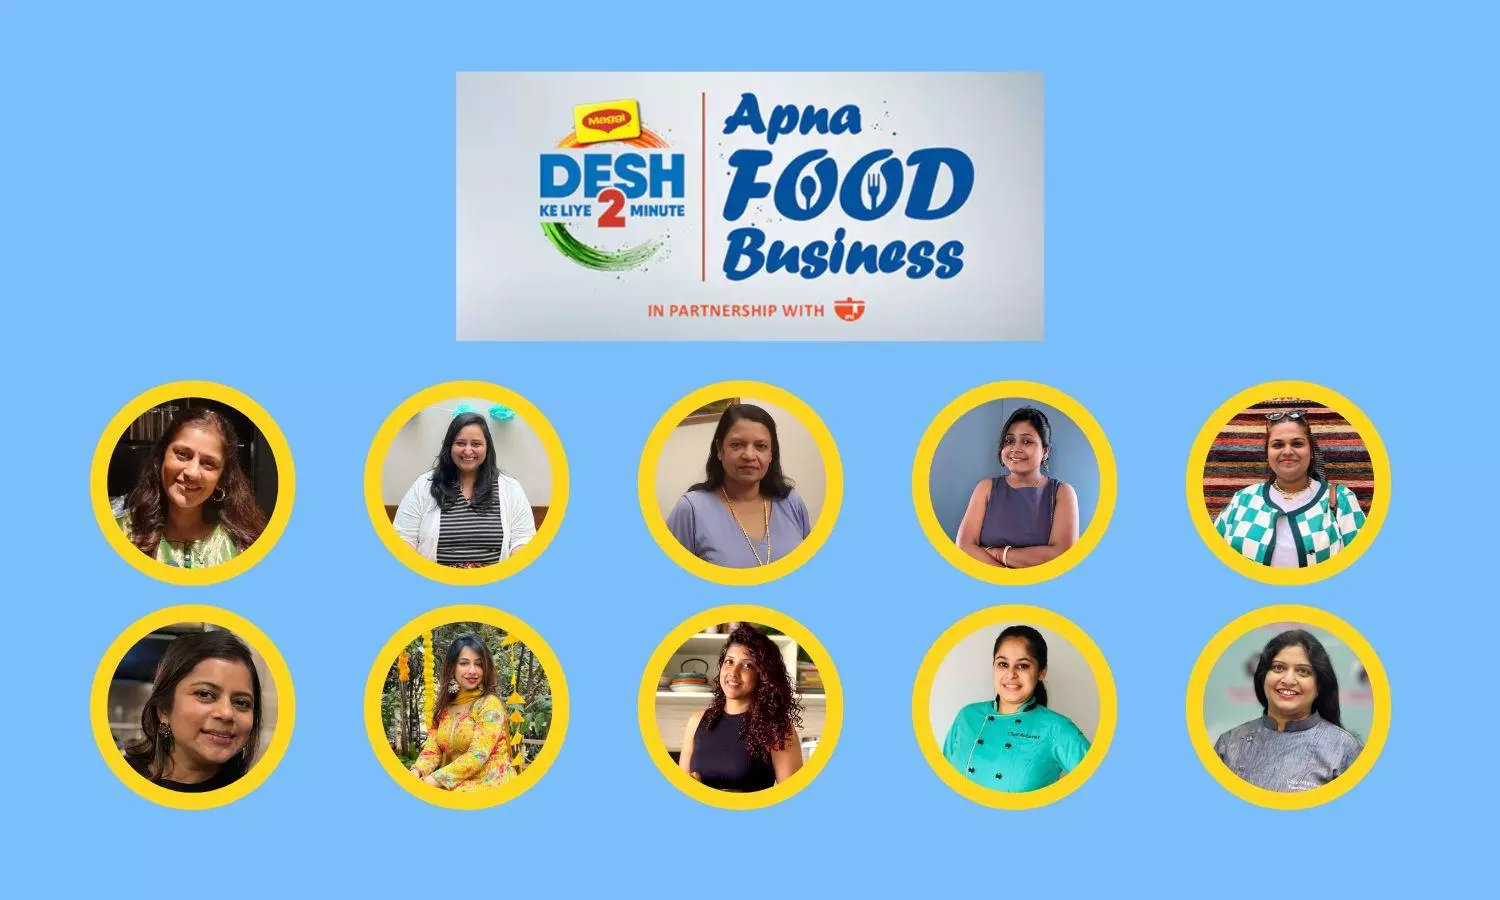 With the end of Maggi’s Apna Food Business second campaign, take a look at our top 10 finalists